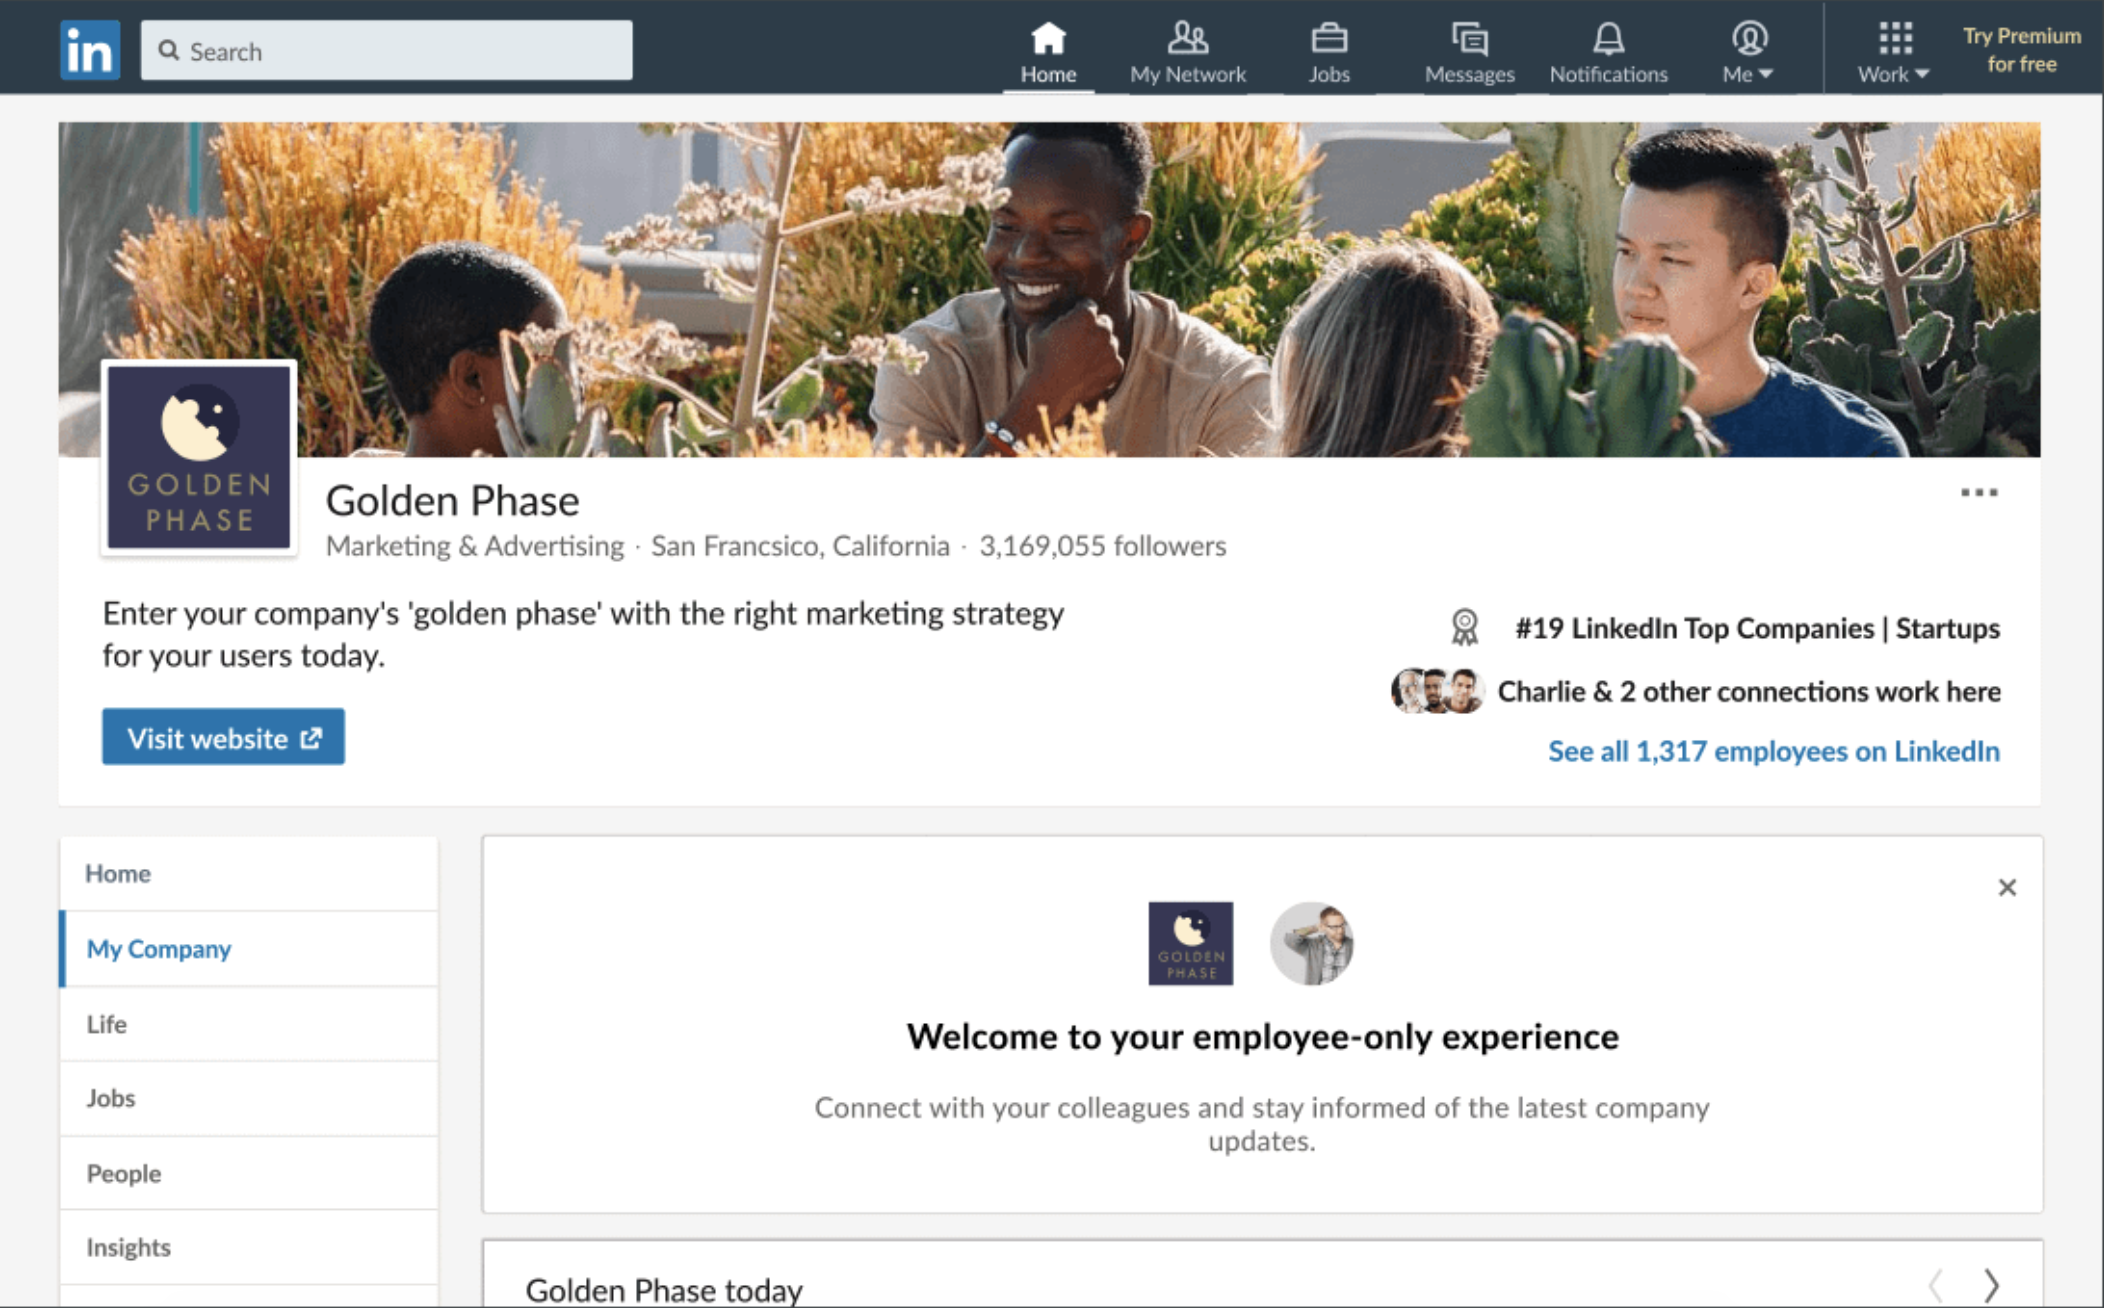 Screenshot of the "My Company" tab by LinkedIn that helps employees connect, communicate and celebrate with each other within a well-established social network.